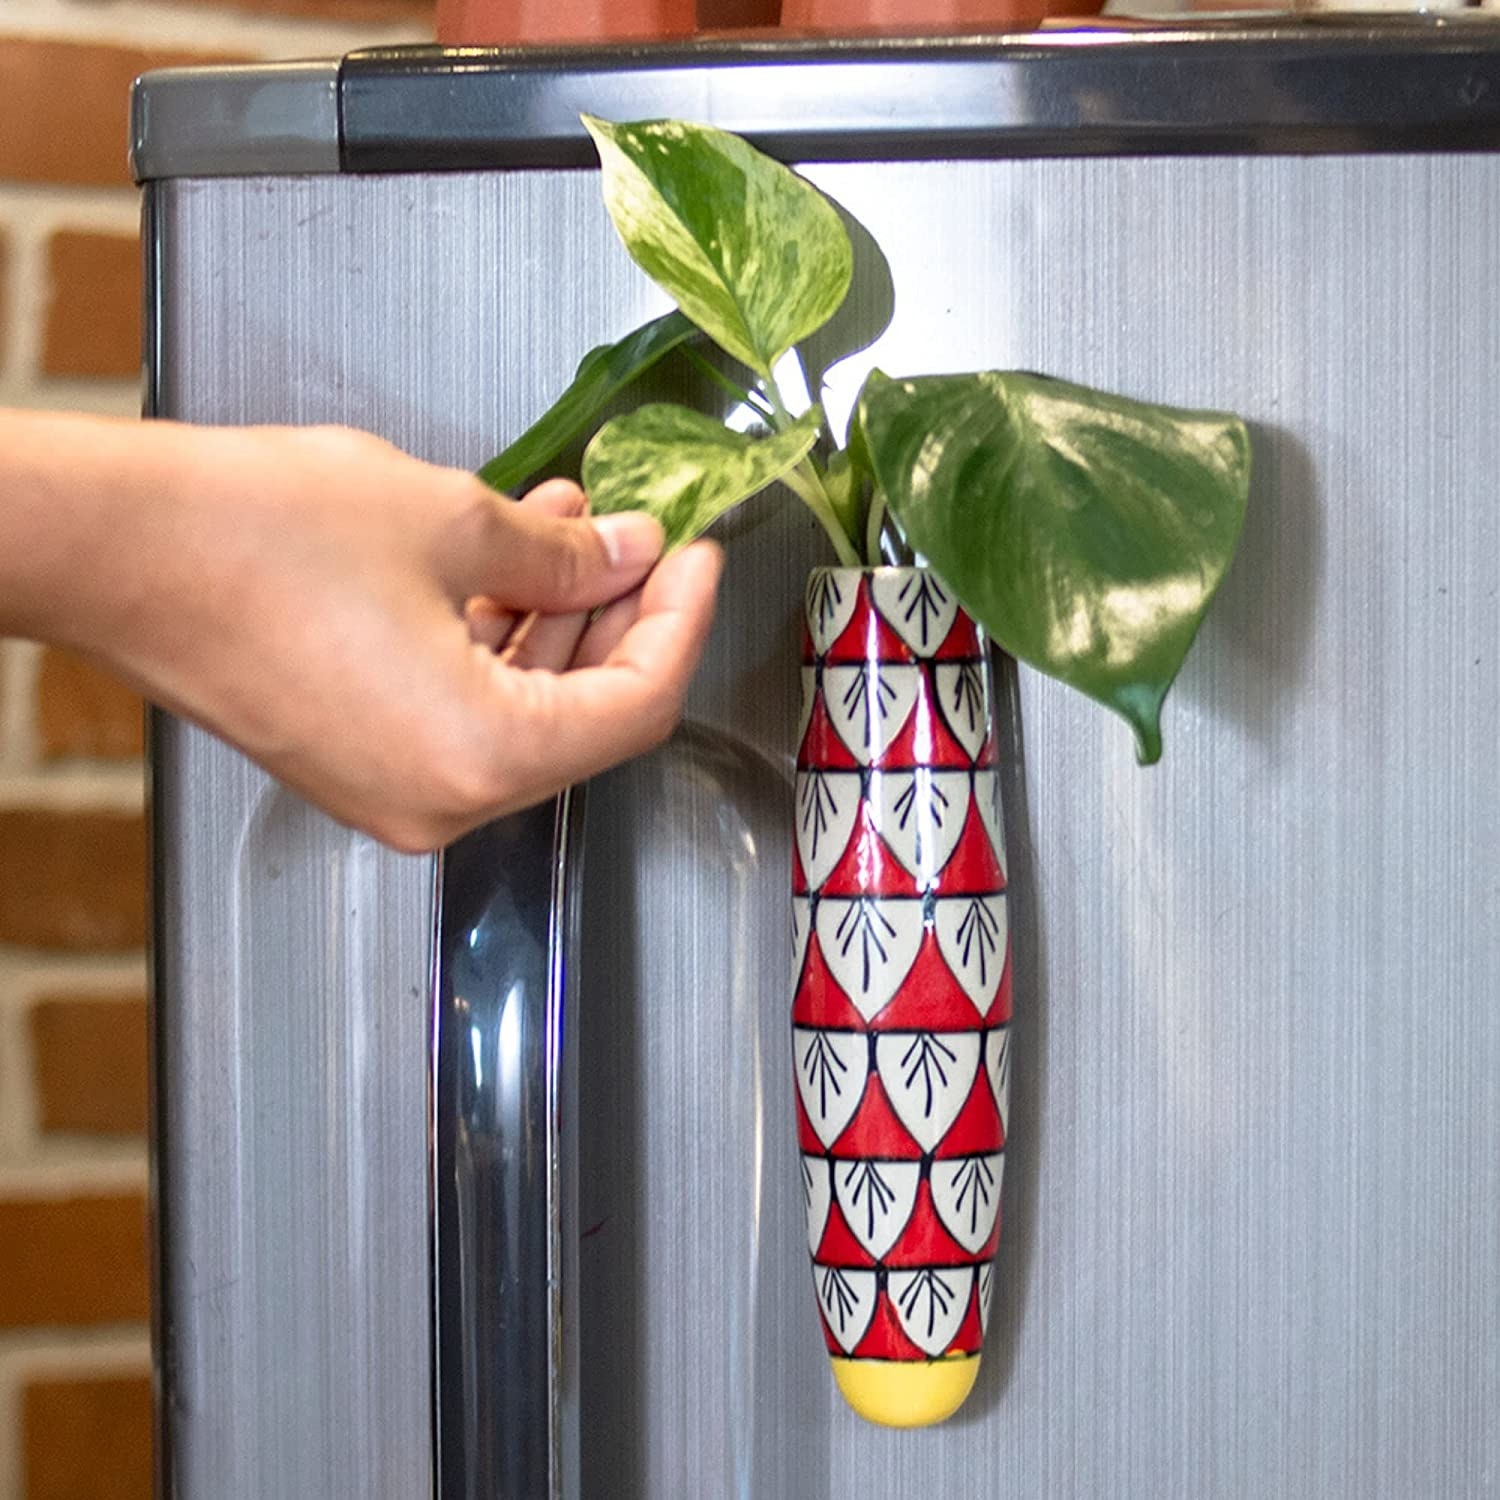 A red and white fridge planter with a plant in it on a fridge